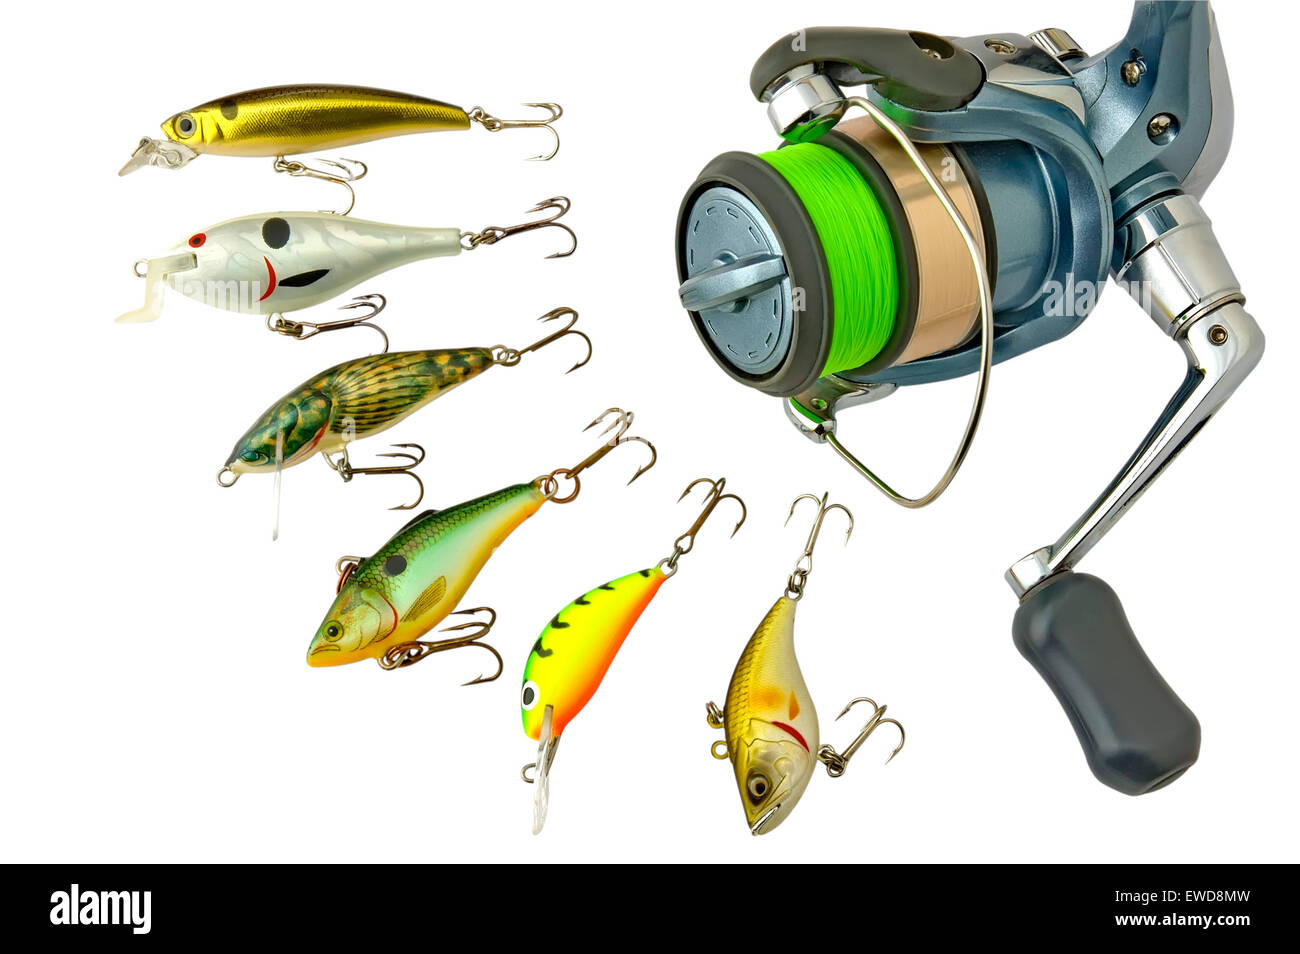 A fishing lure(wobblers) and reel, isolated on a white background. Stock Photo